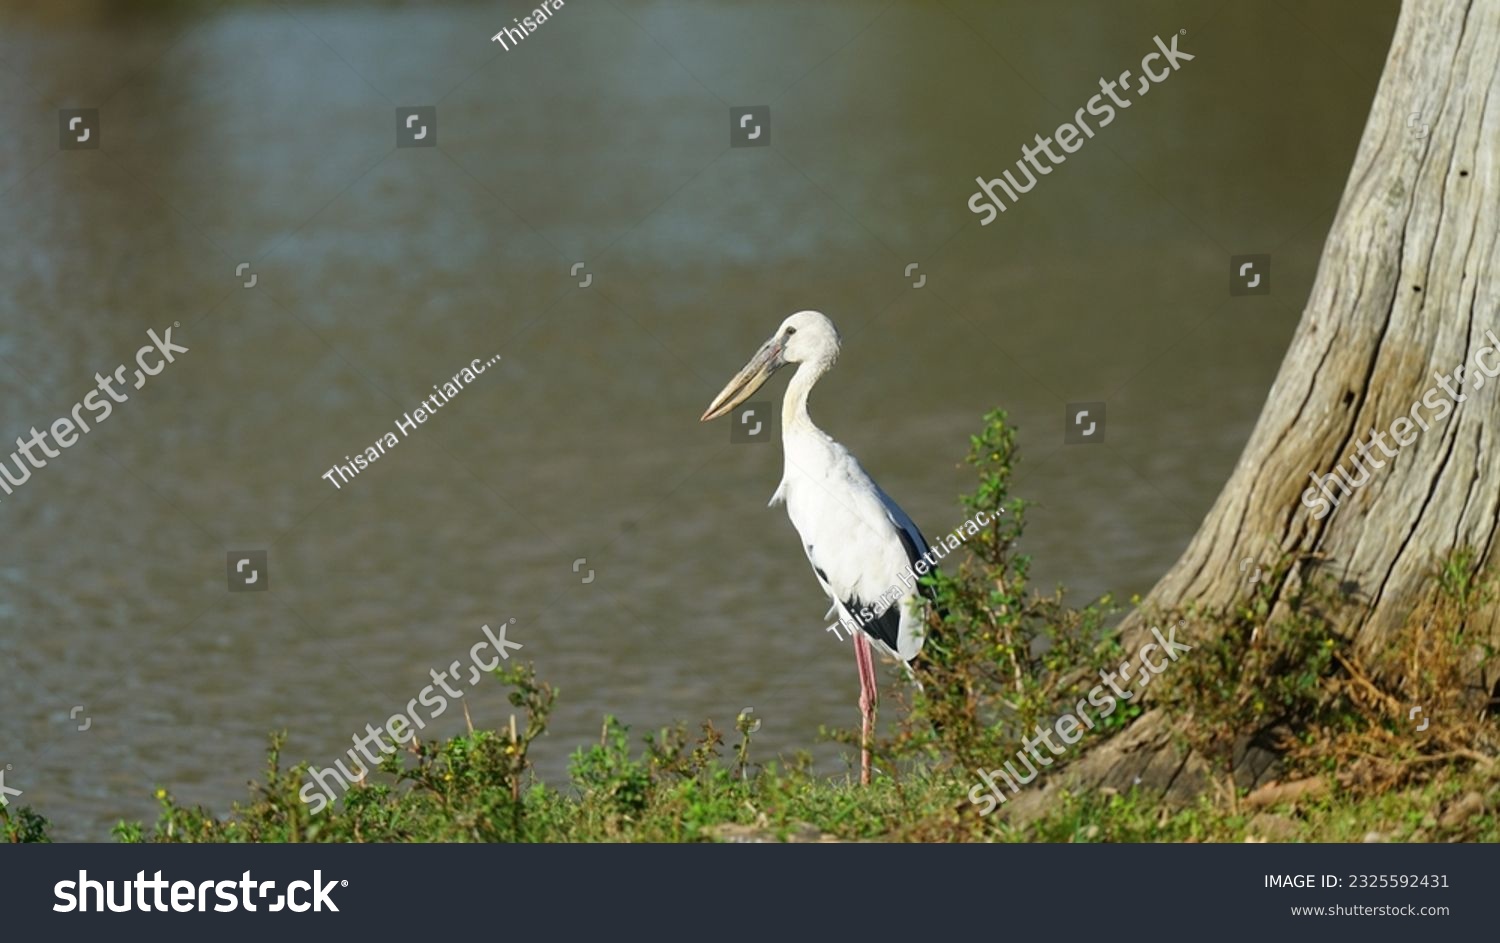 Feeding Behavior: The Asian Openbill has a specialized feeding behavior. Its distinct bill shape allows it to feed primarily on large mollusks, especially snails. The bill is used to probe and pry ope #2325592431